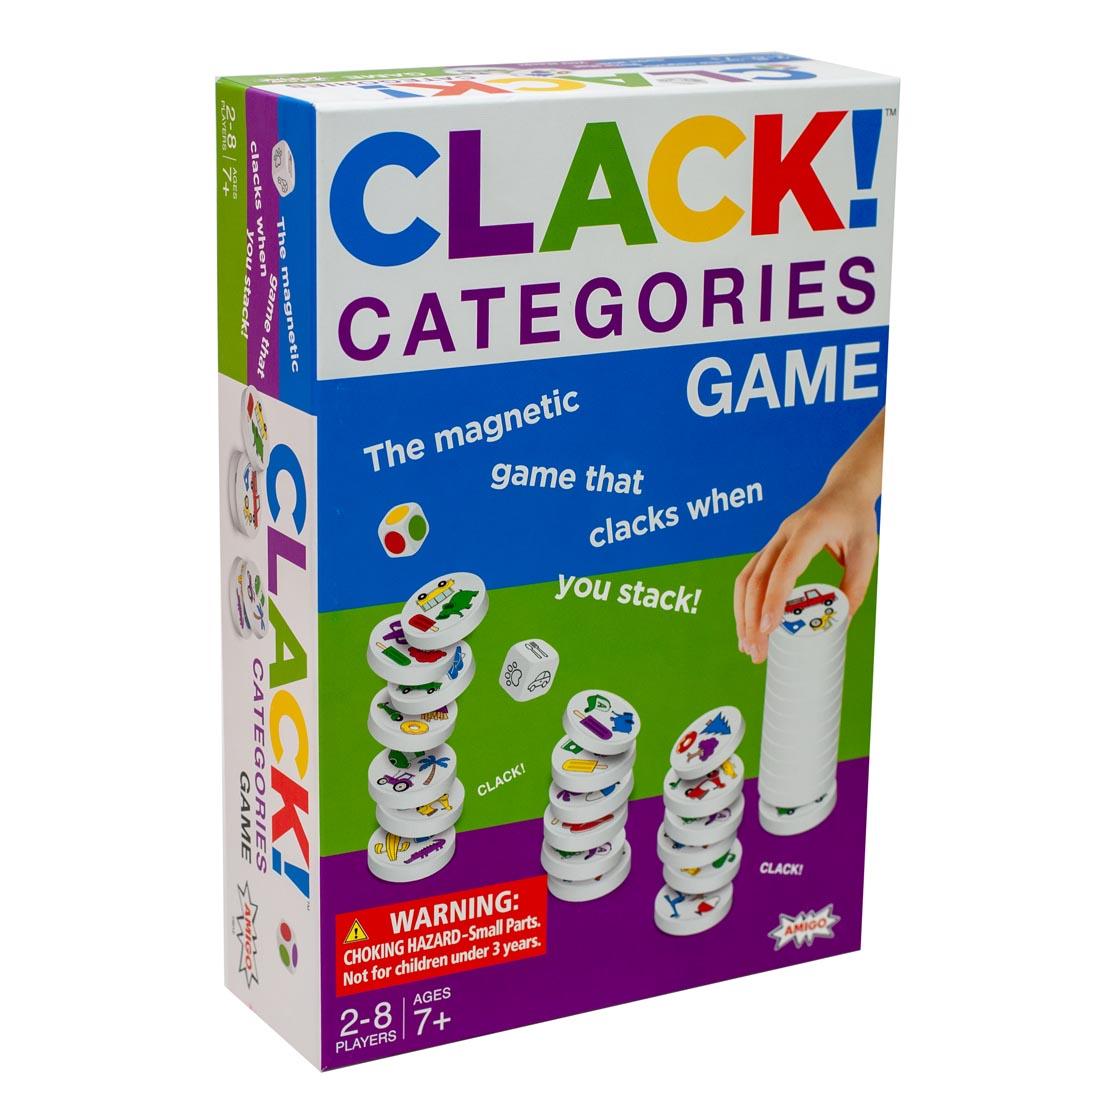 package of Clack Categories Game